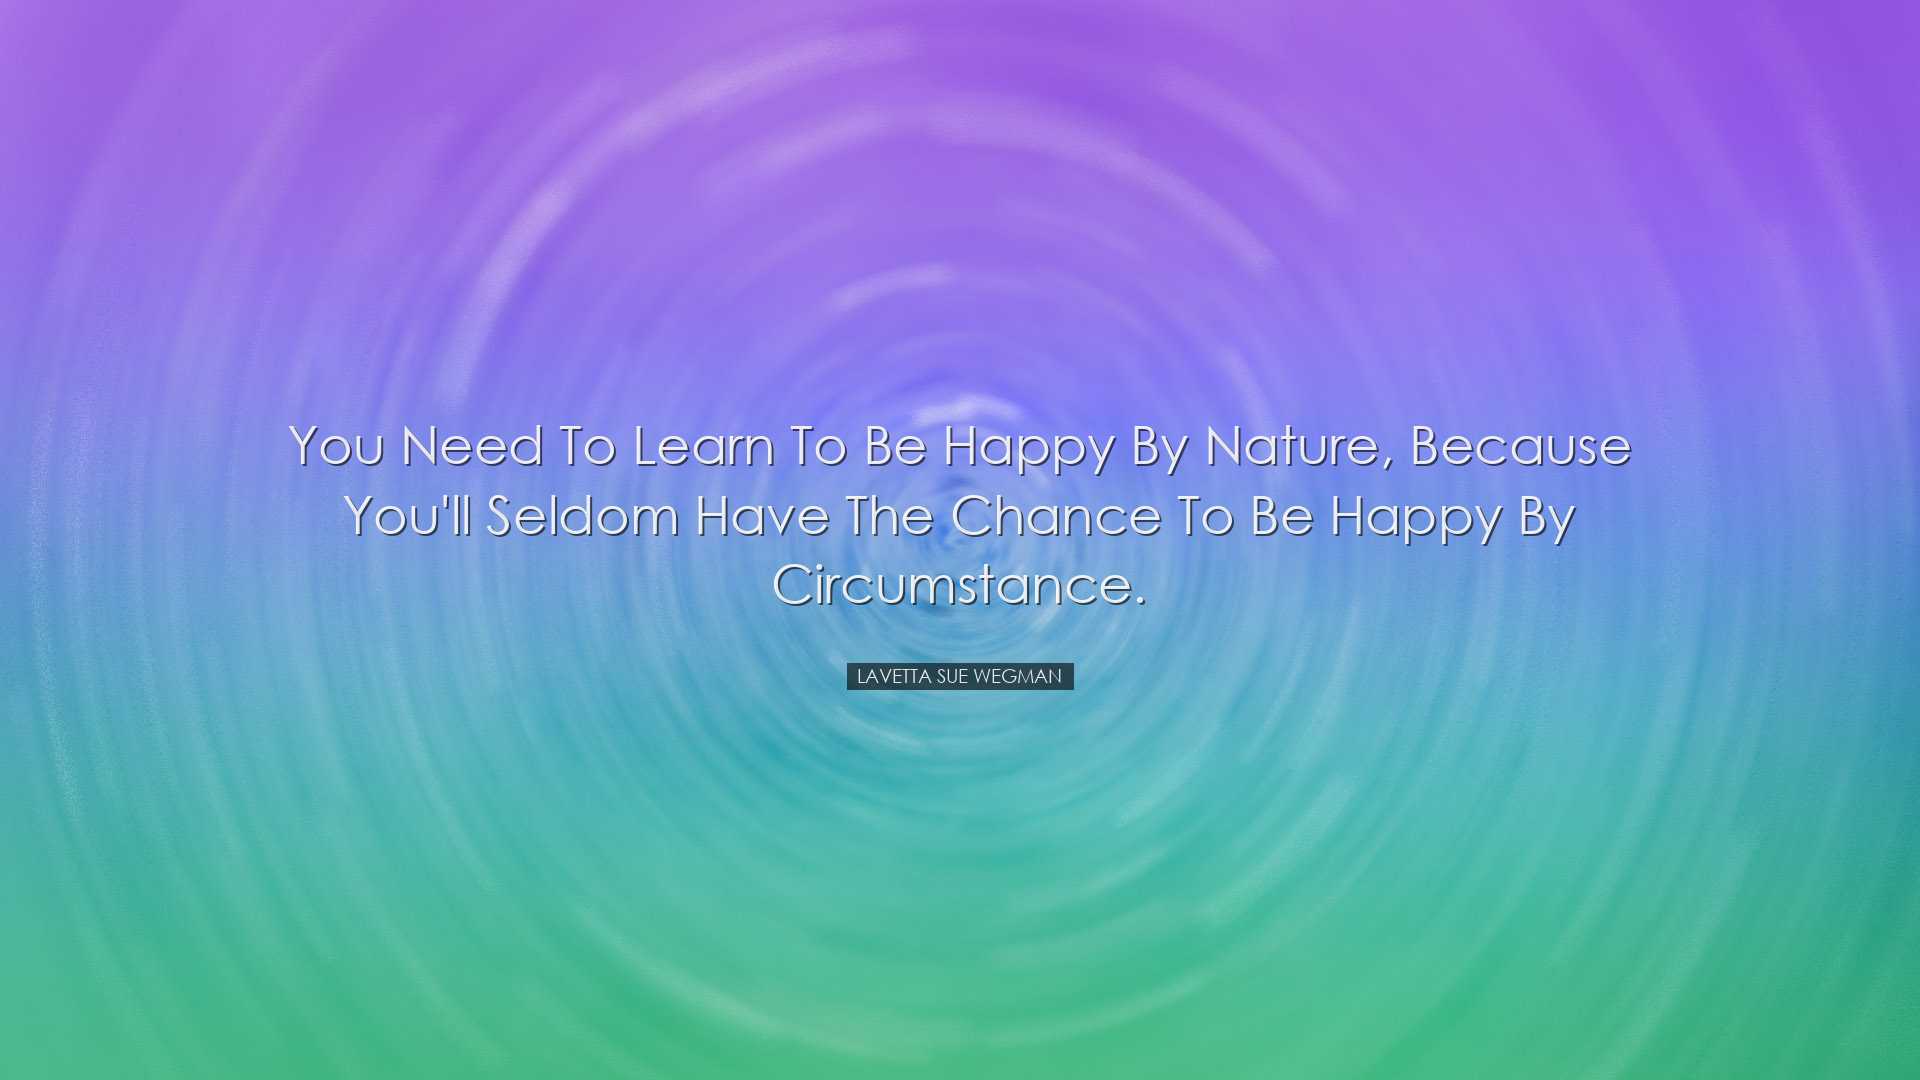 You need to learn to be happy by nature, because you'll seldom hav